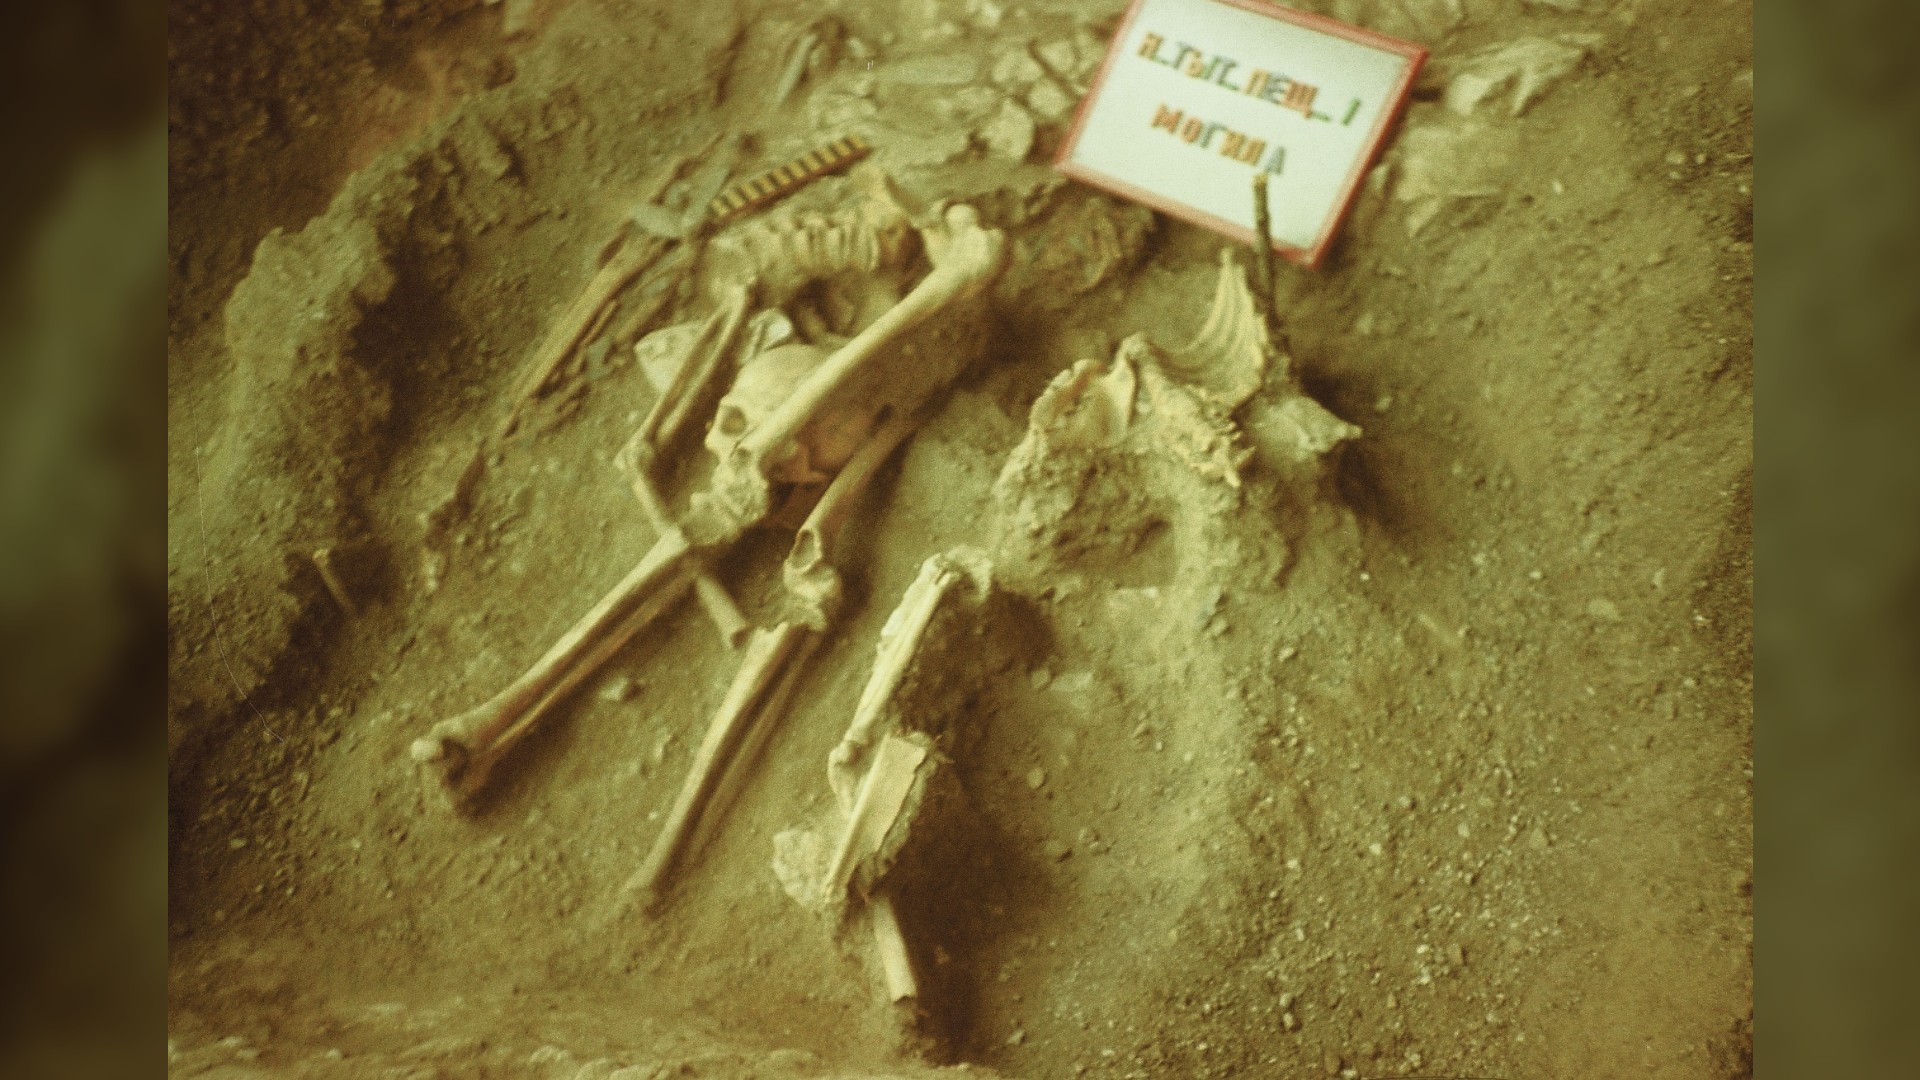 Human remains found in grave.